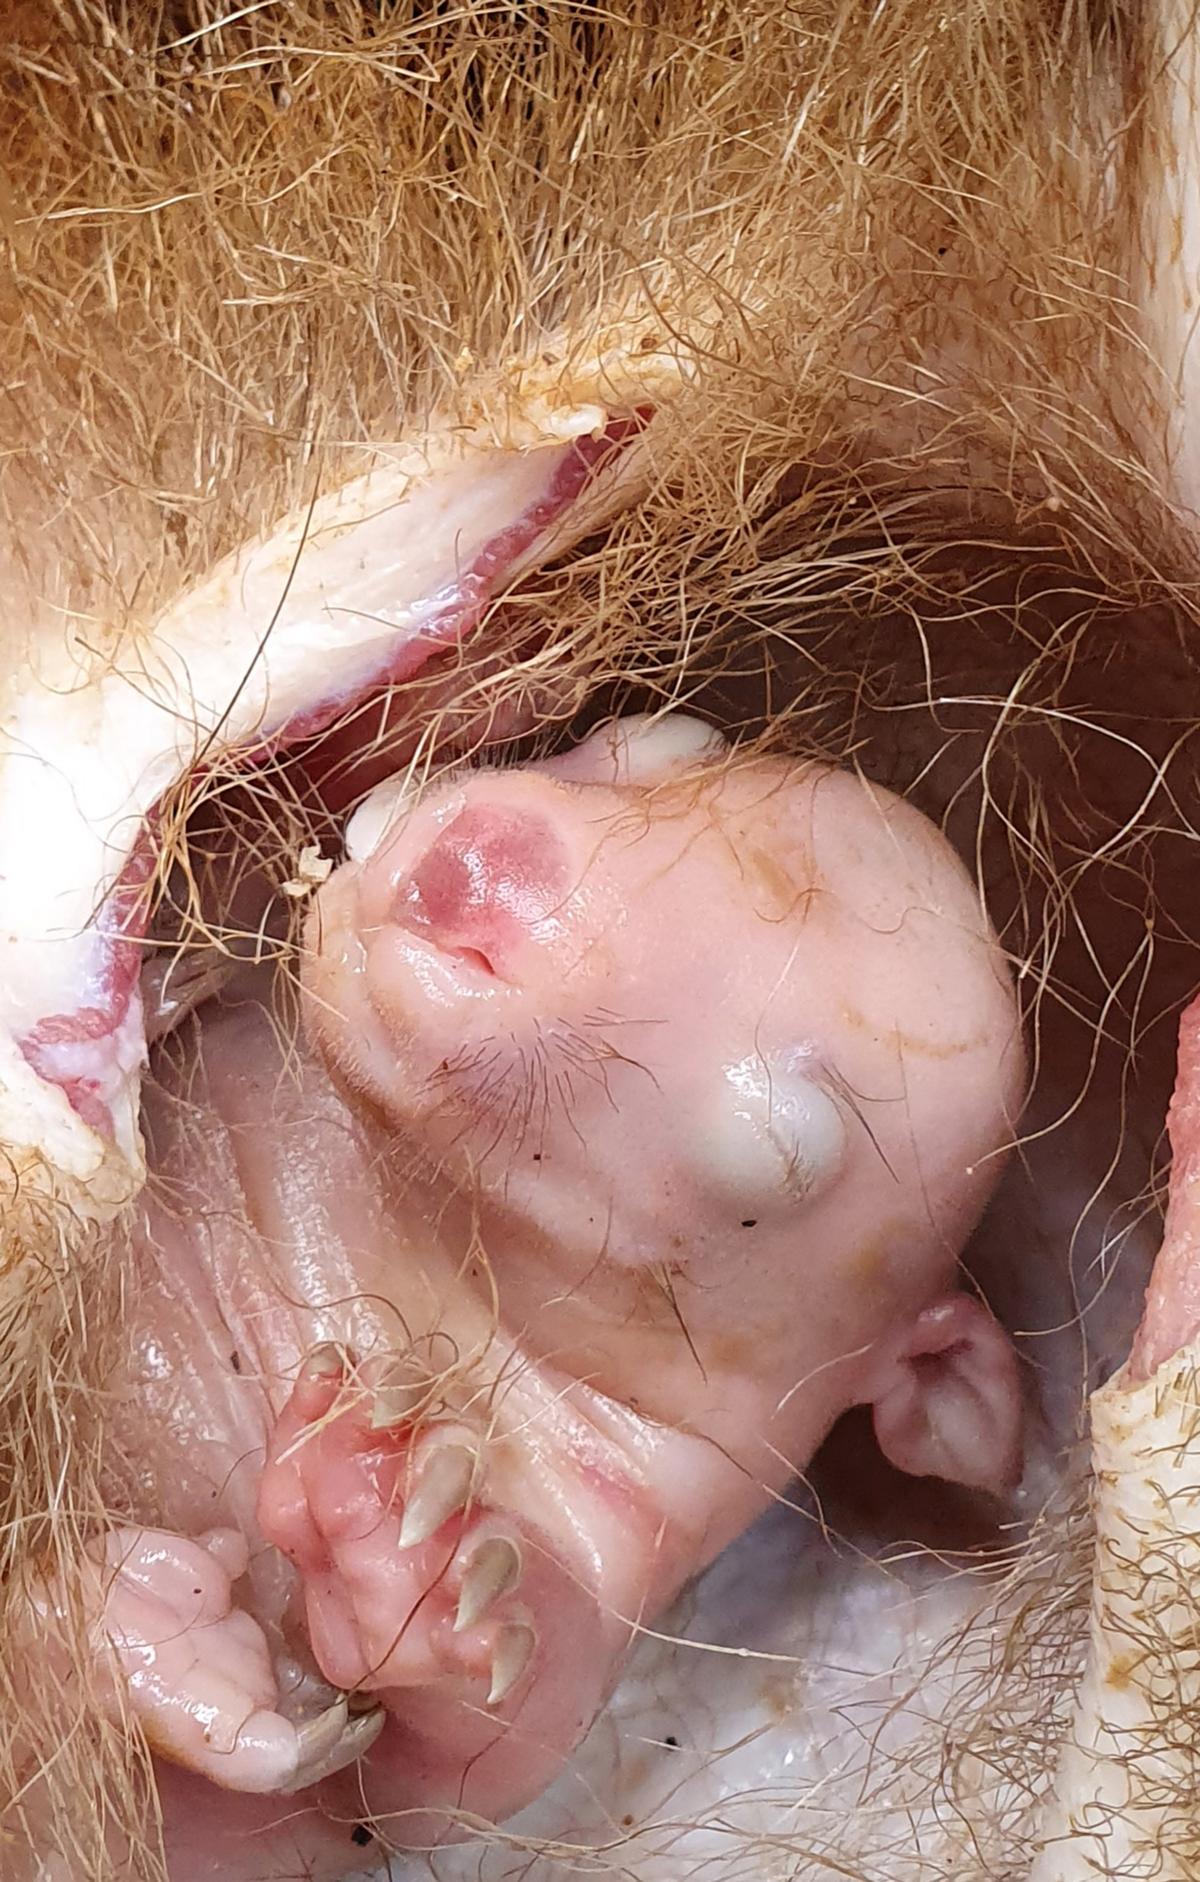 The baby wombat trapped in the mother's pouch. (Caters News)